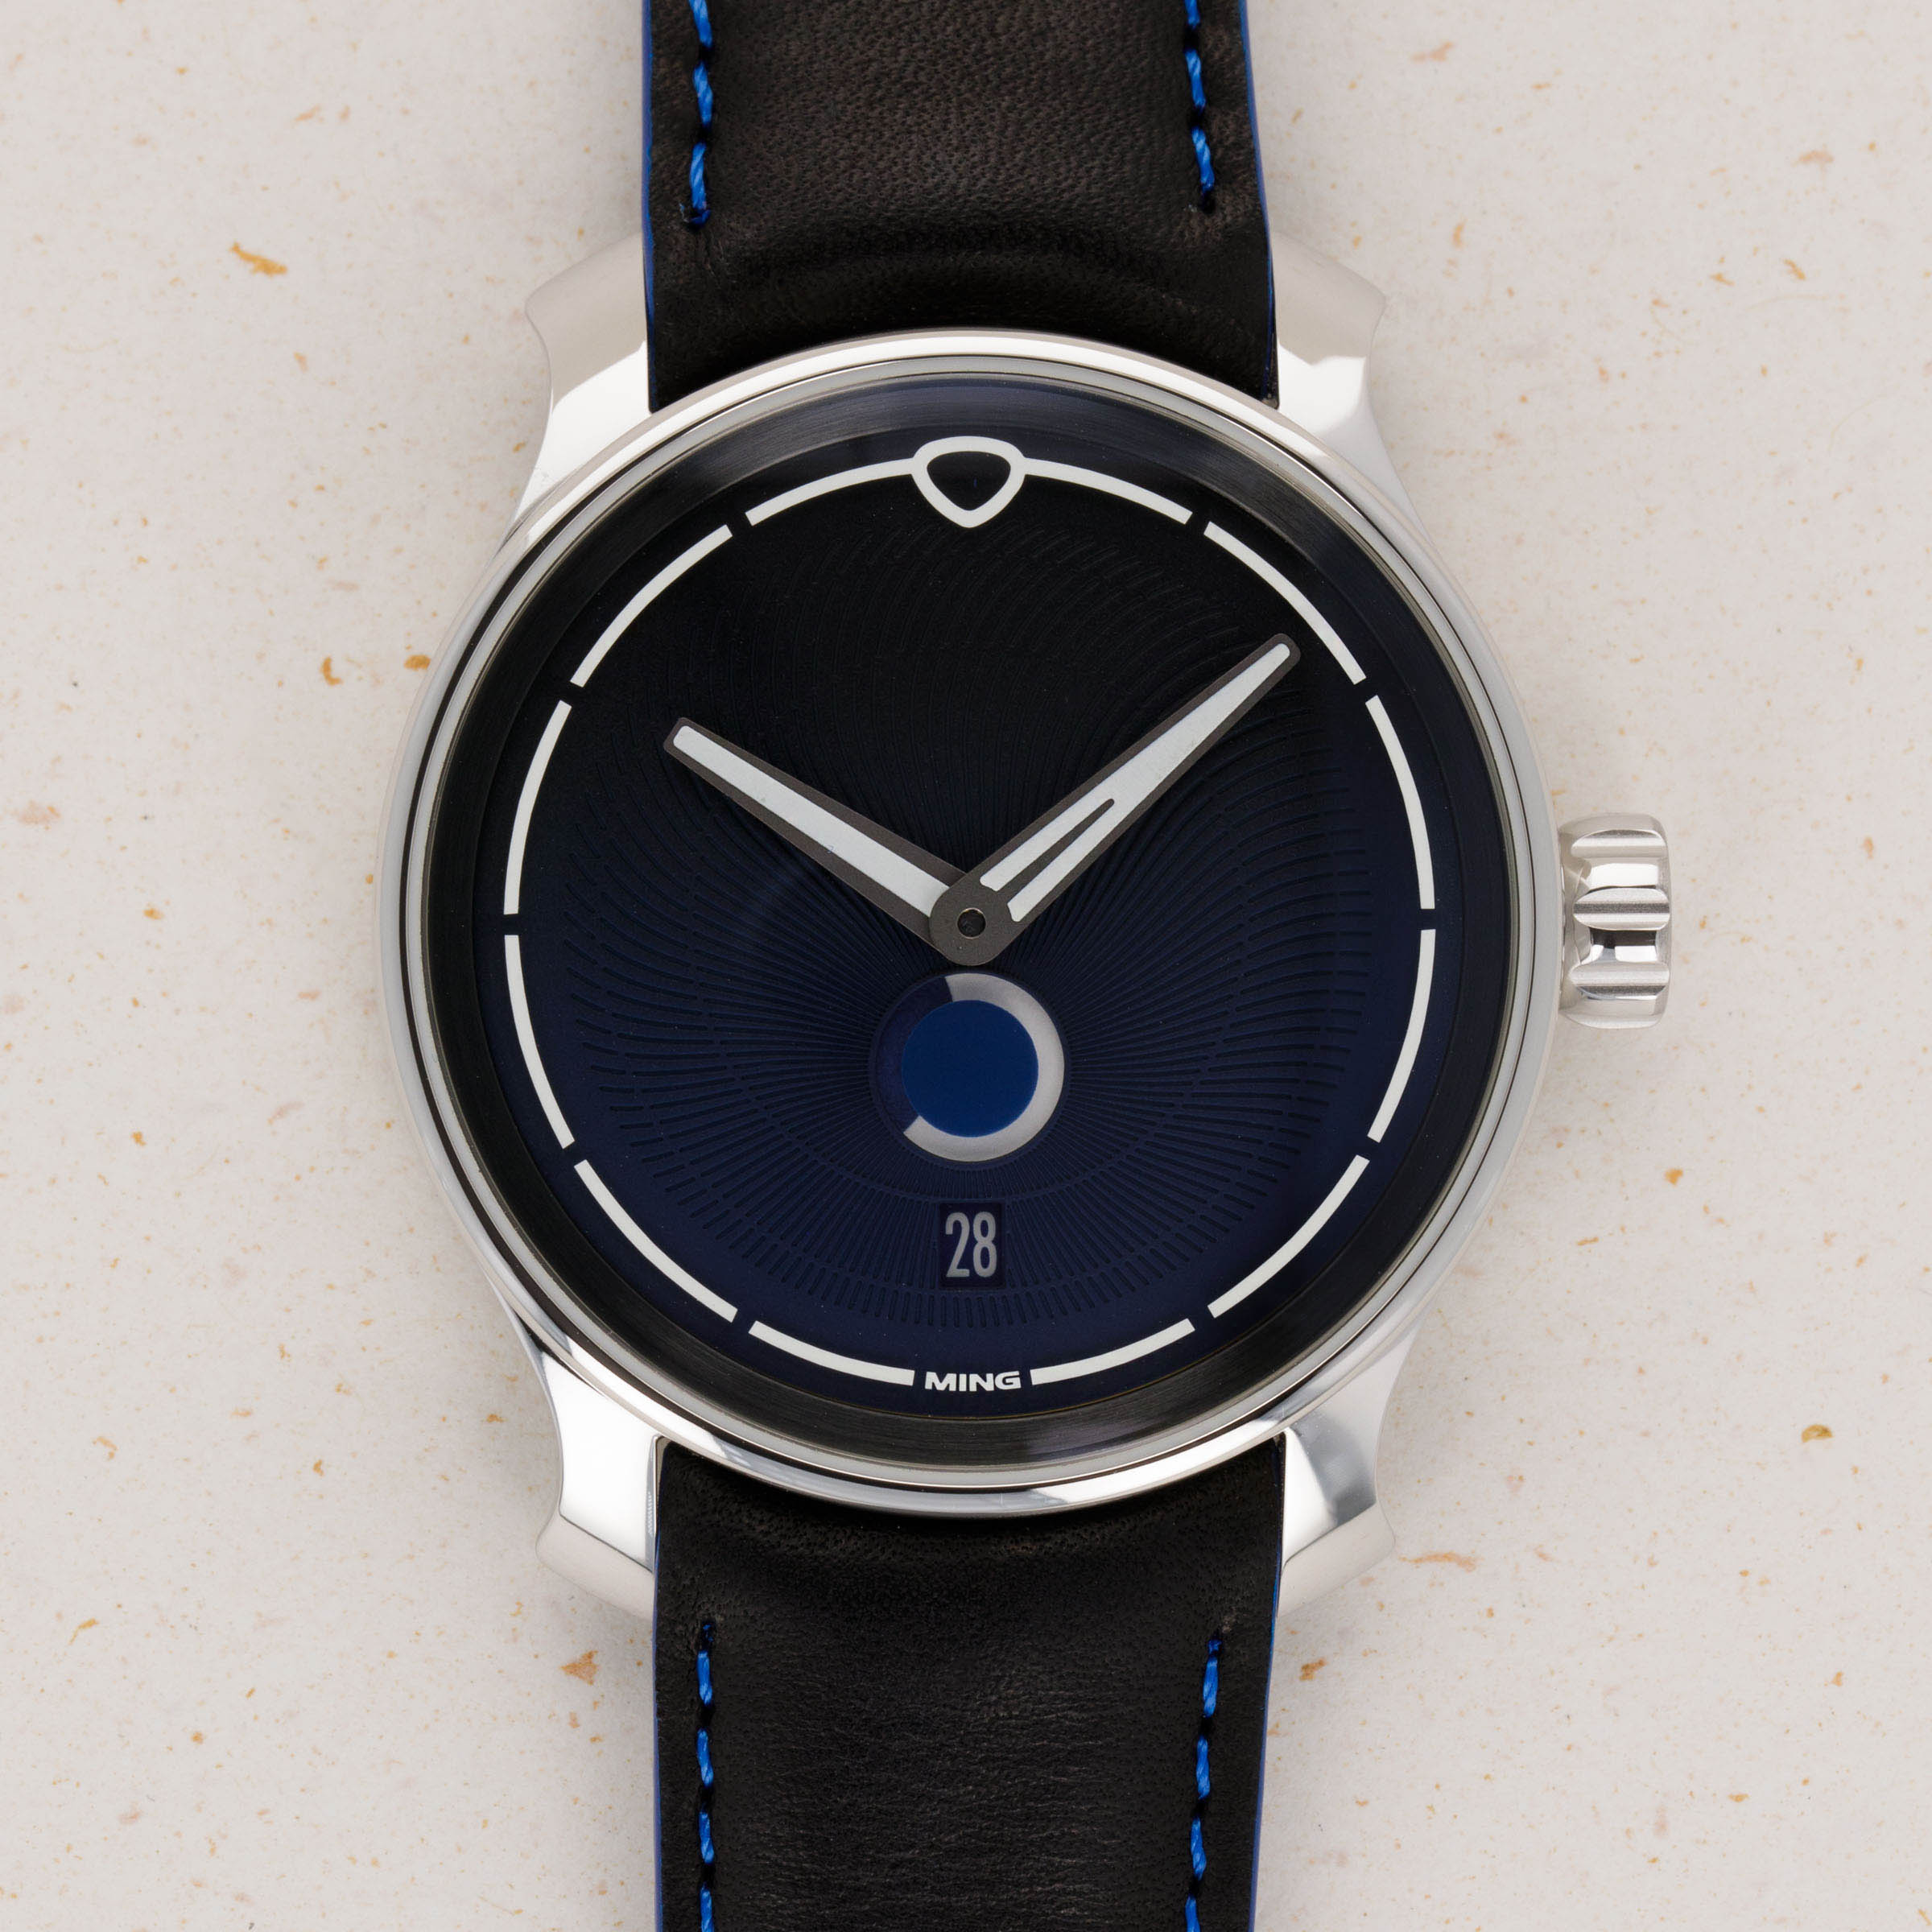 Ming 37.05 Moonphase Date | Auctions | Loupe This